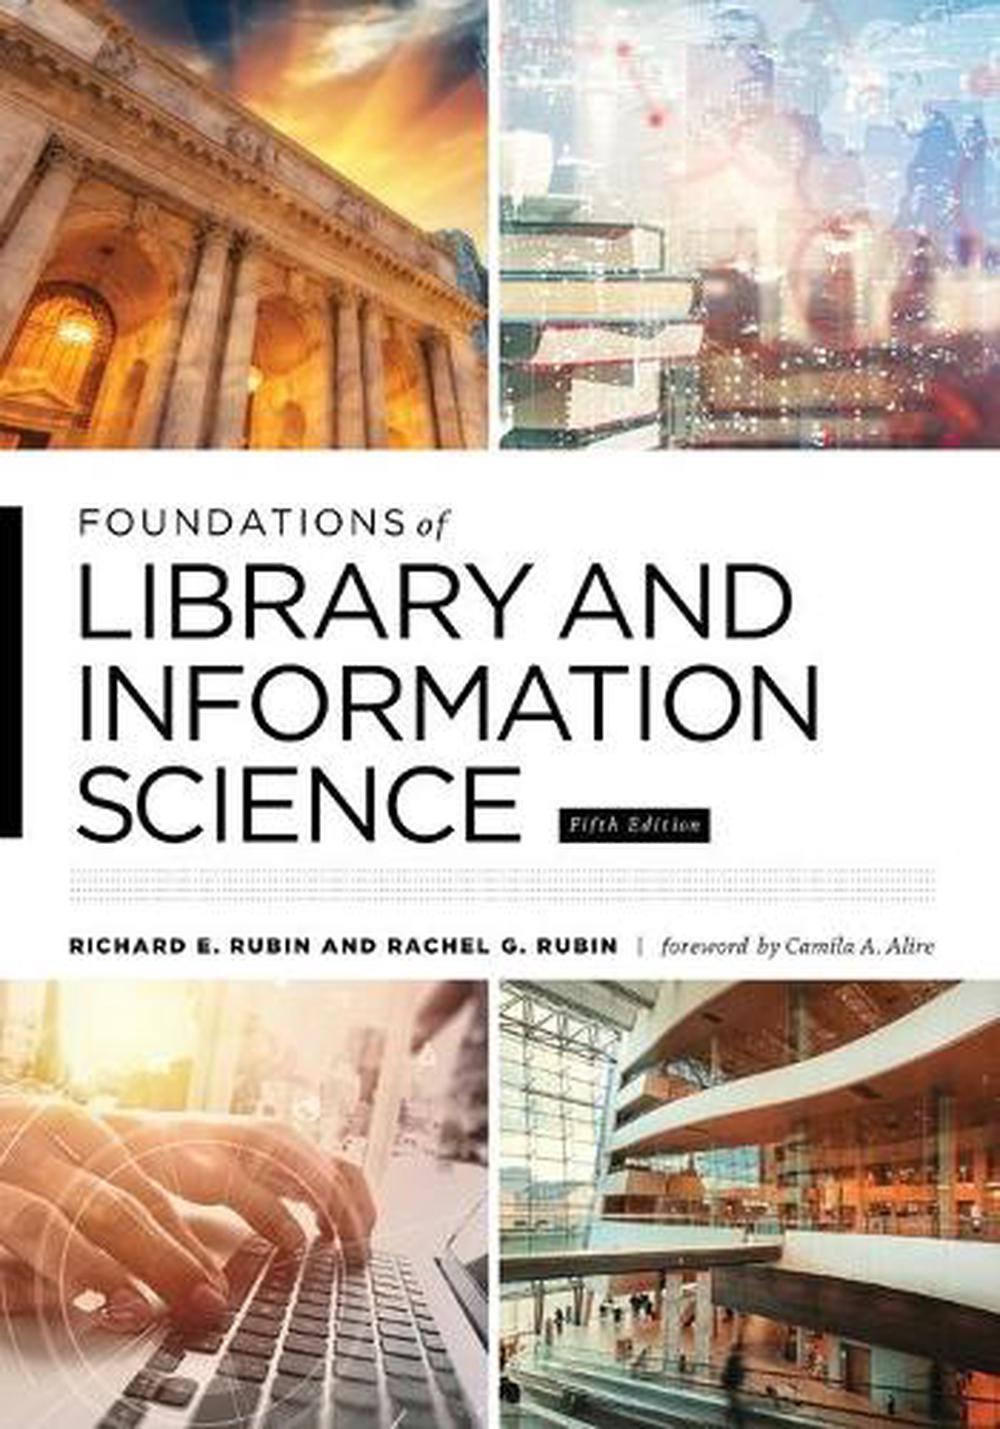 library and information science thesis pdf